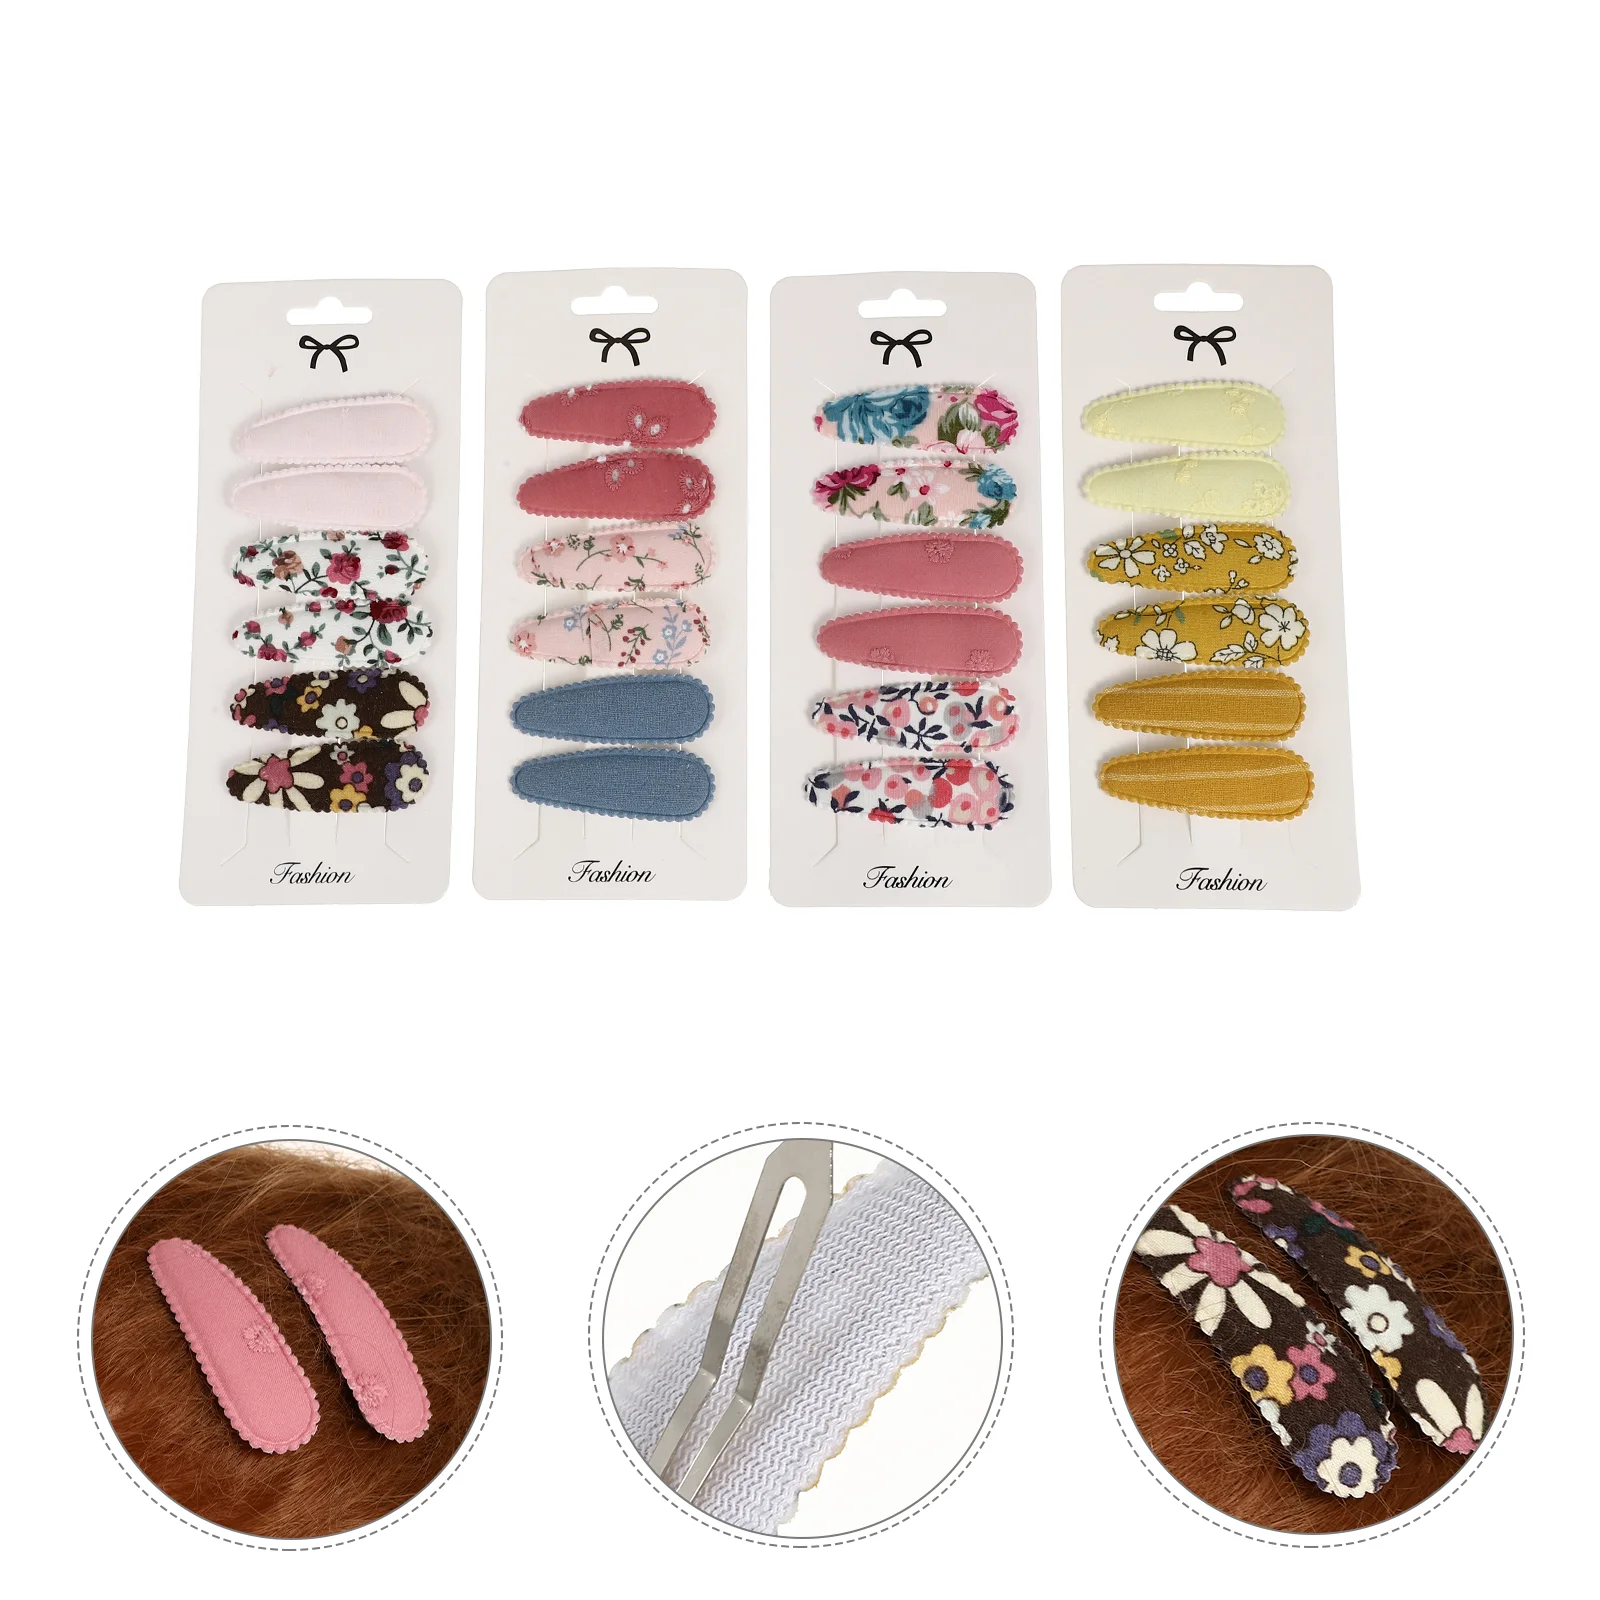 

24 Pcs Floral Fabric Hair Clips Girls Hairpin Wedding Tiara Barrettes Accessory Toddler Accessories